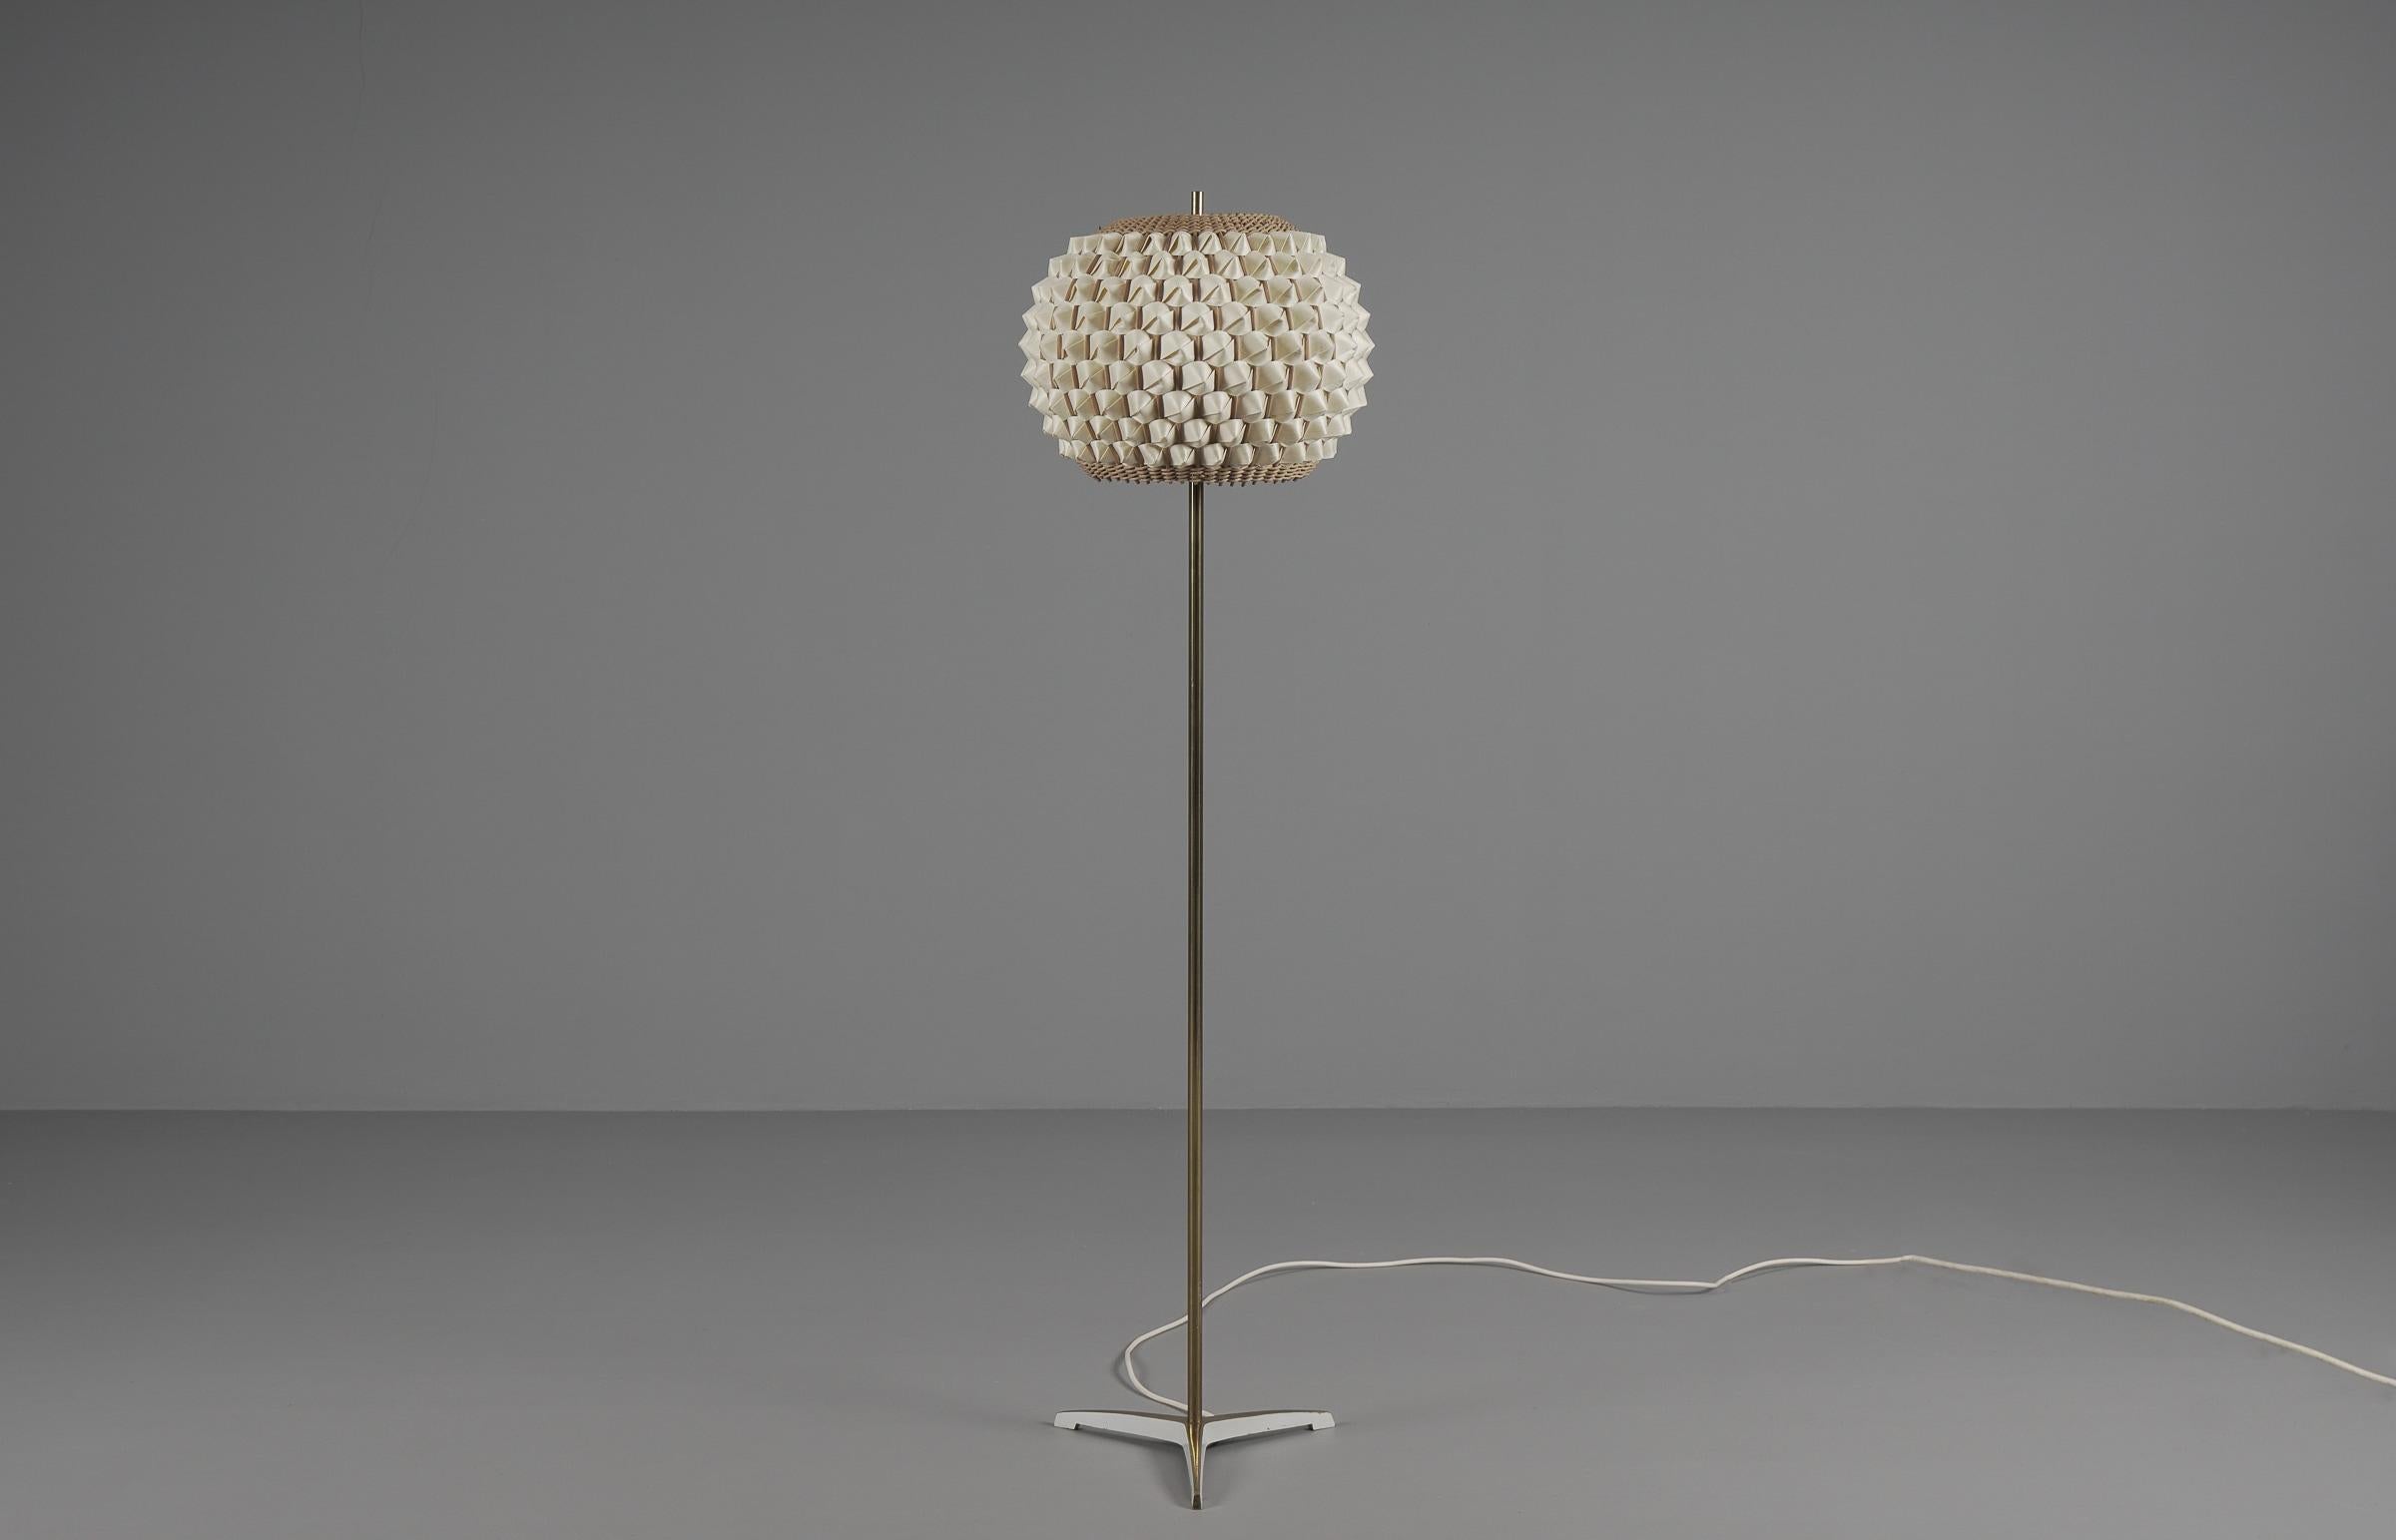 Scandinavian Tripod Floor Lamp with Wicker Lamp Shade, 1950s Italy For Sale